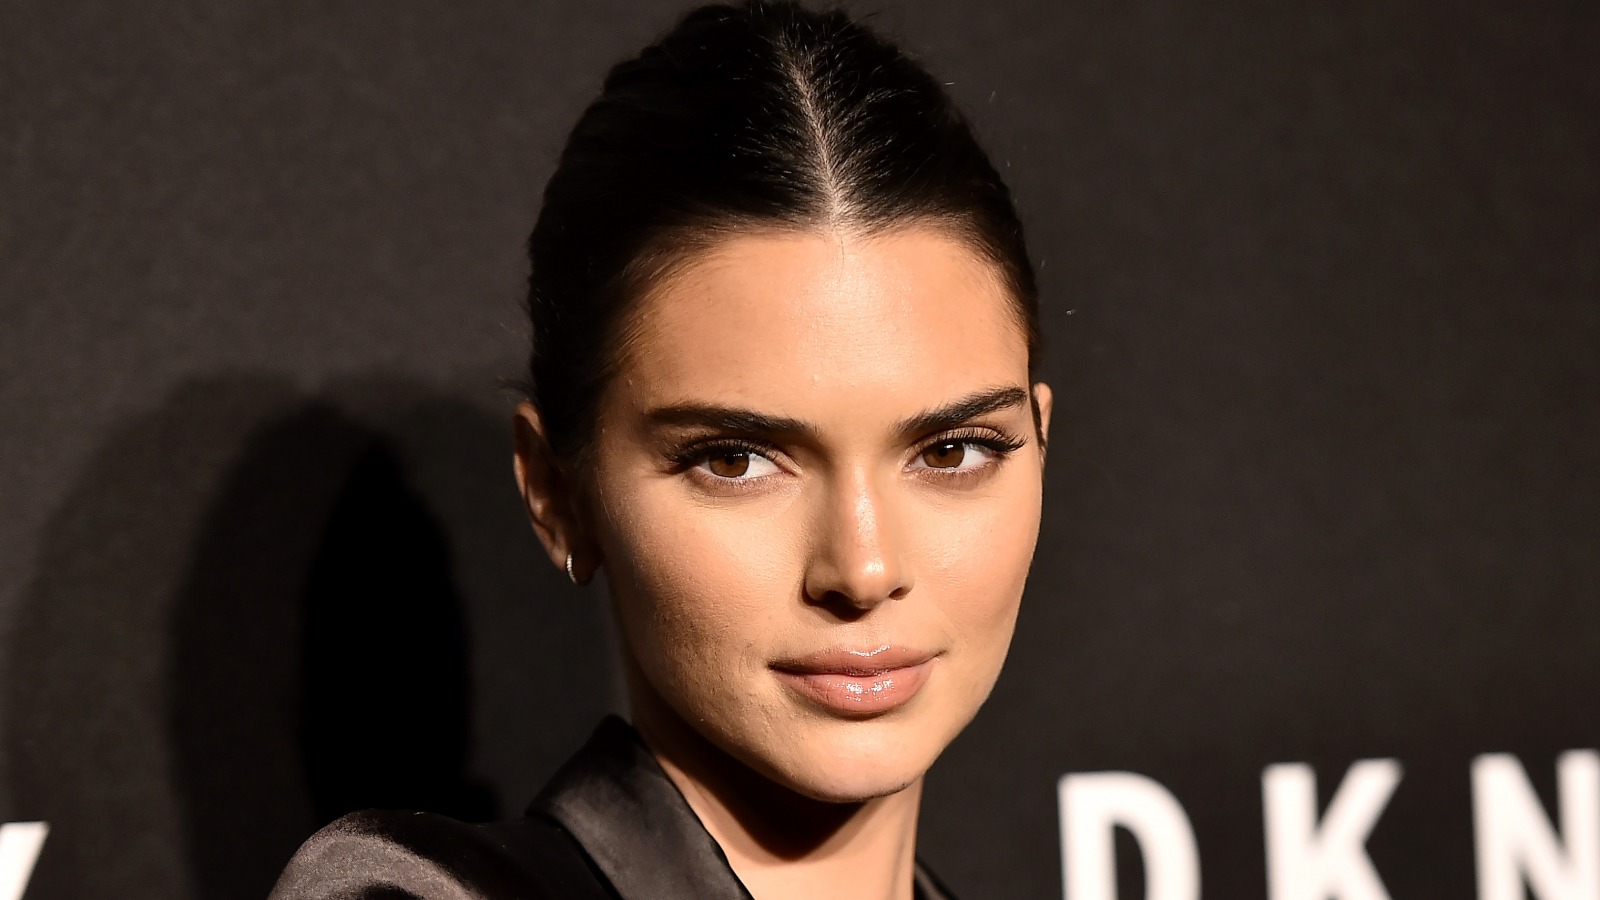 Kendall Jenner Made A Bold Claim About Her Mom's Boyfriend On KUWTK